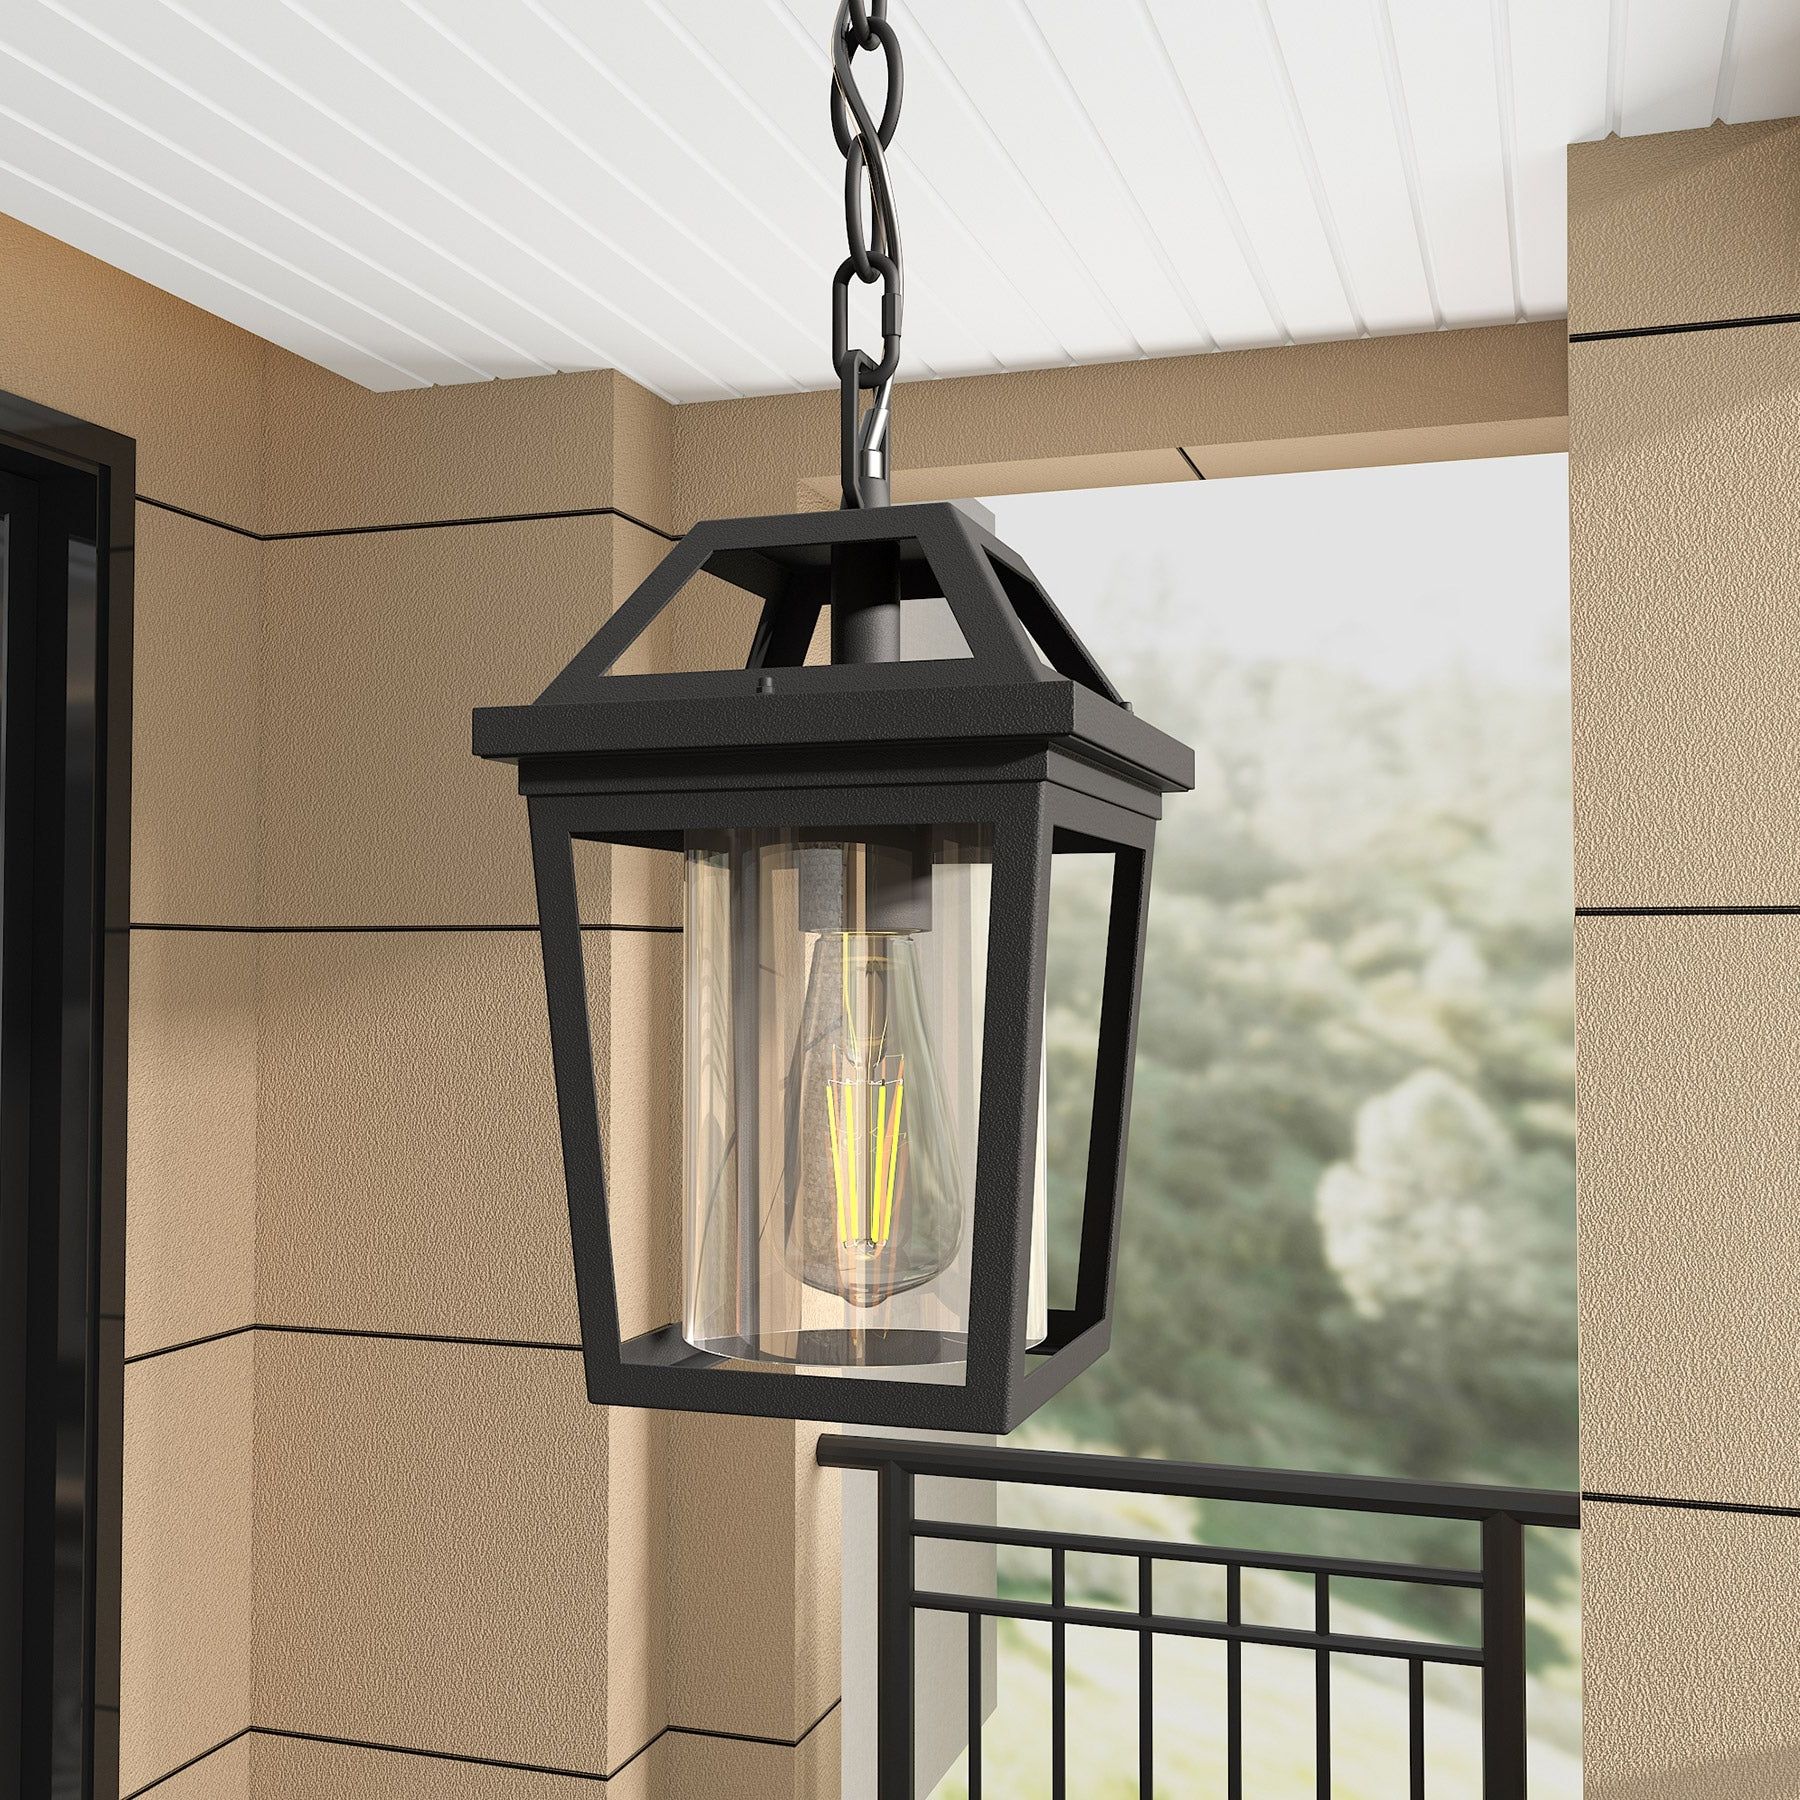 2019 Modern Black Outdoor Lantern Pendant Light With Metal Clear Glass Shape –  Overstock – 35474825 Pertaining To Blackened Iron Lantern Chandeliers (View 12 of 15)